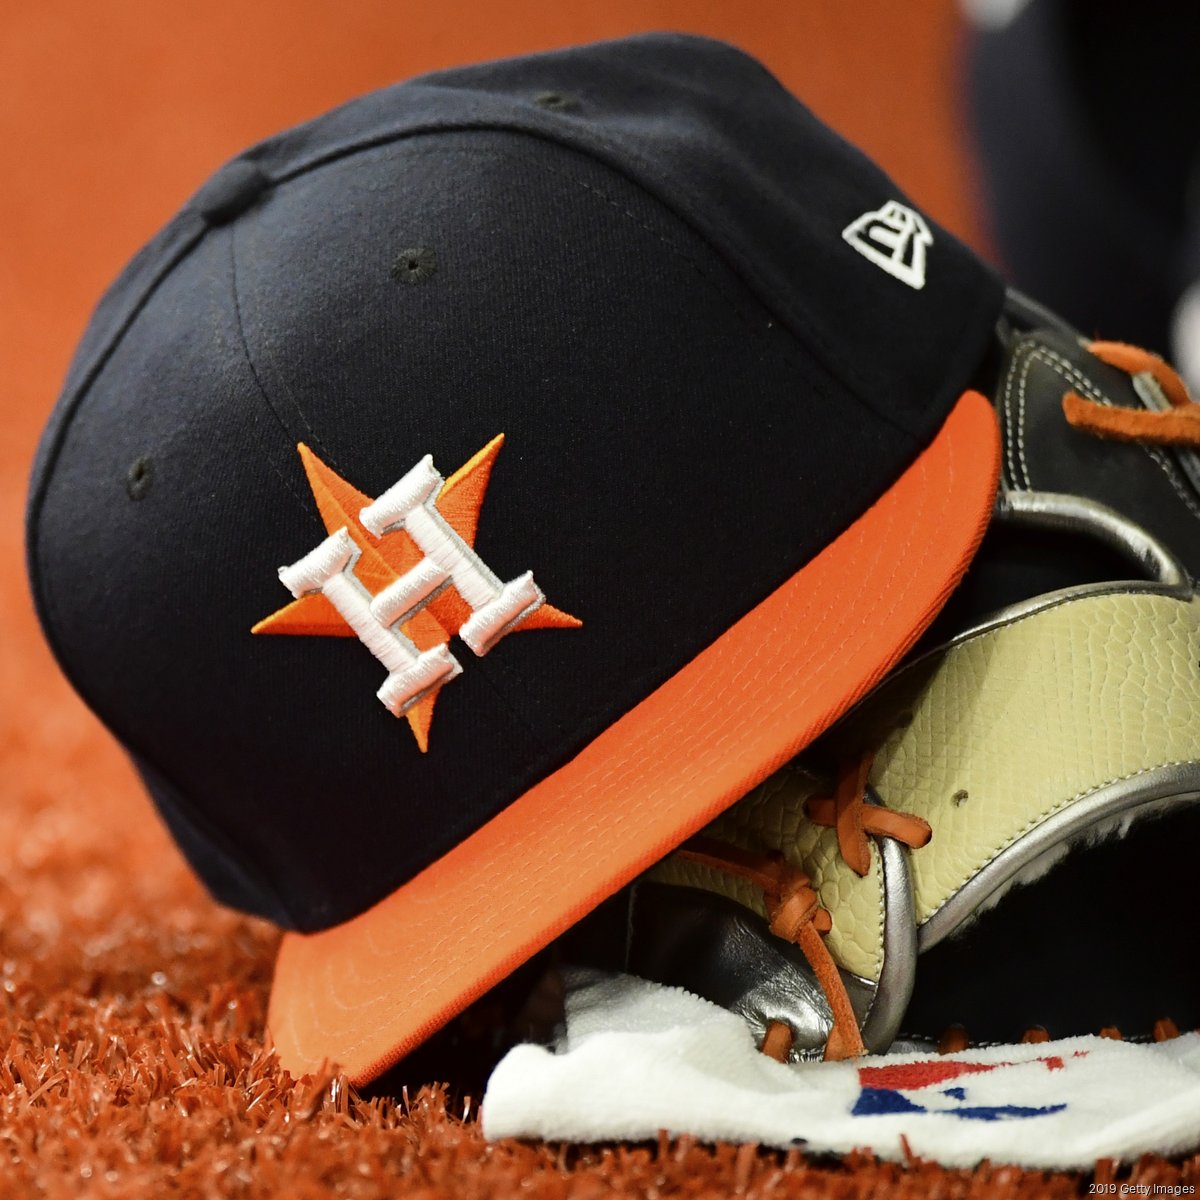 Houston Astros, Rockets acquire AT&T SportsNet Southwest